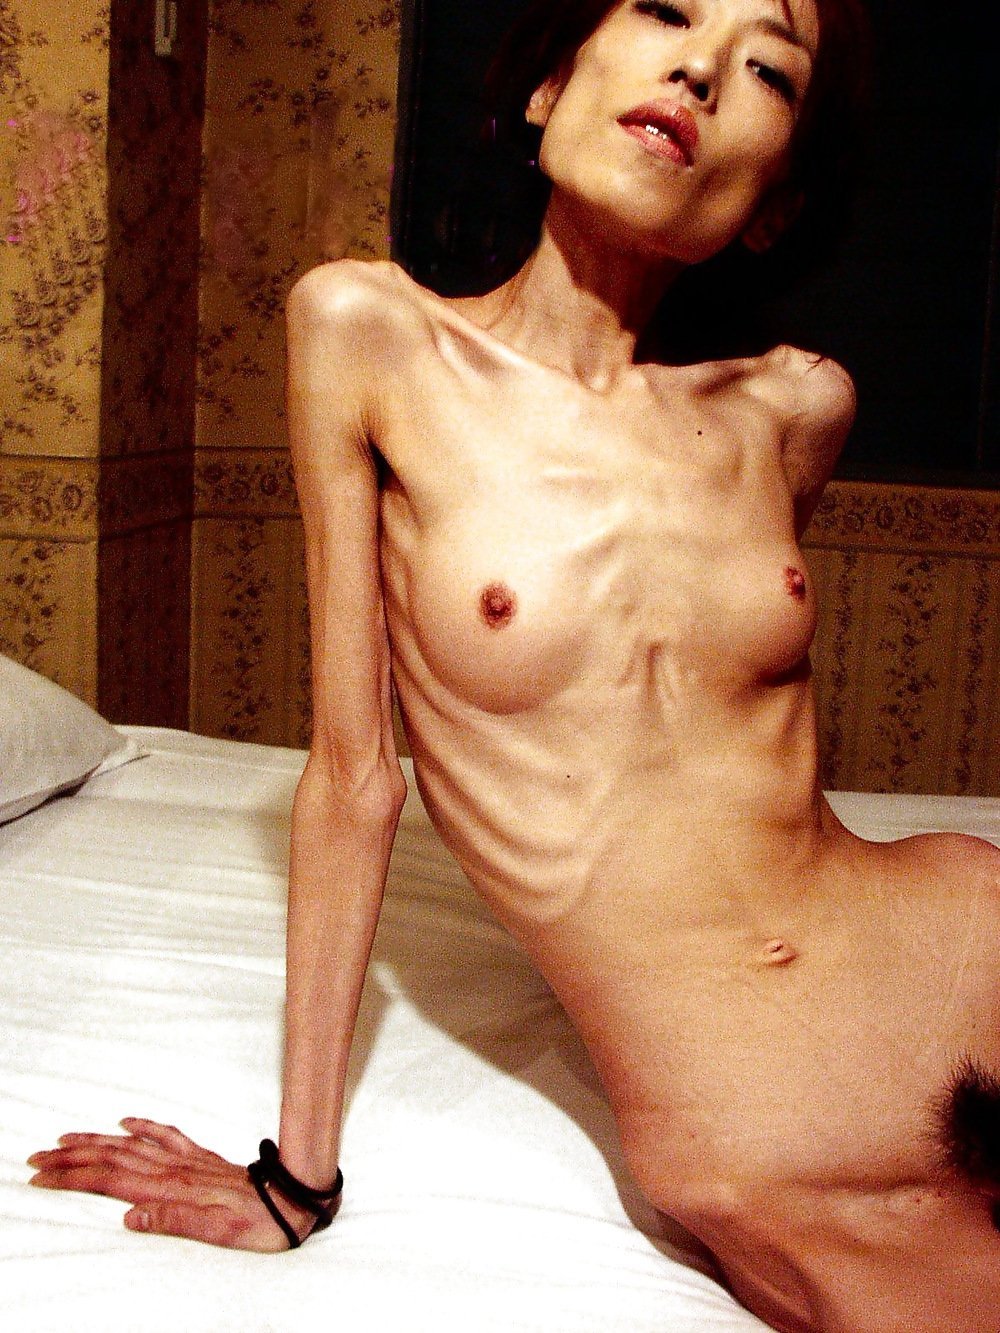 Anorexic sex best adult free images